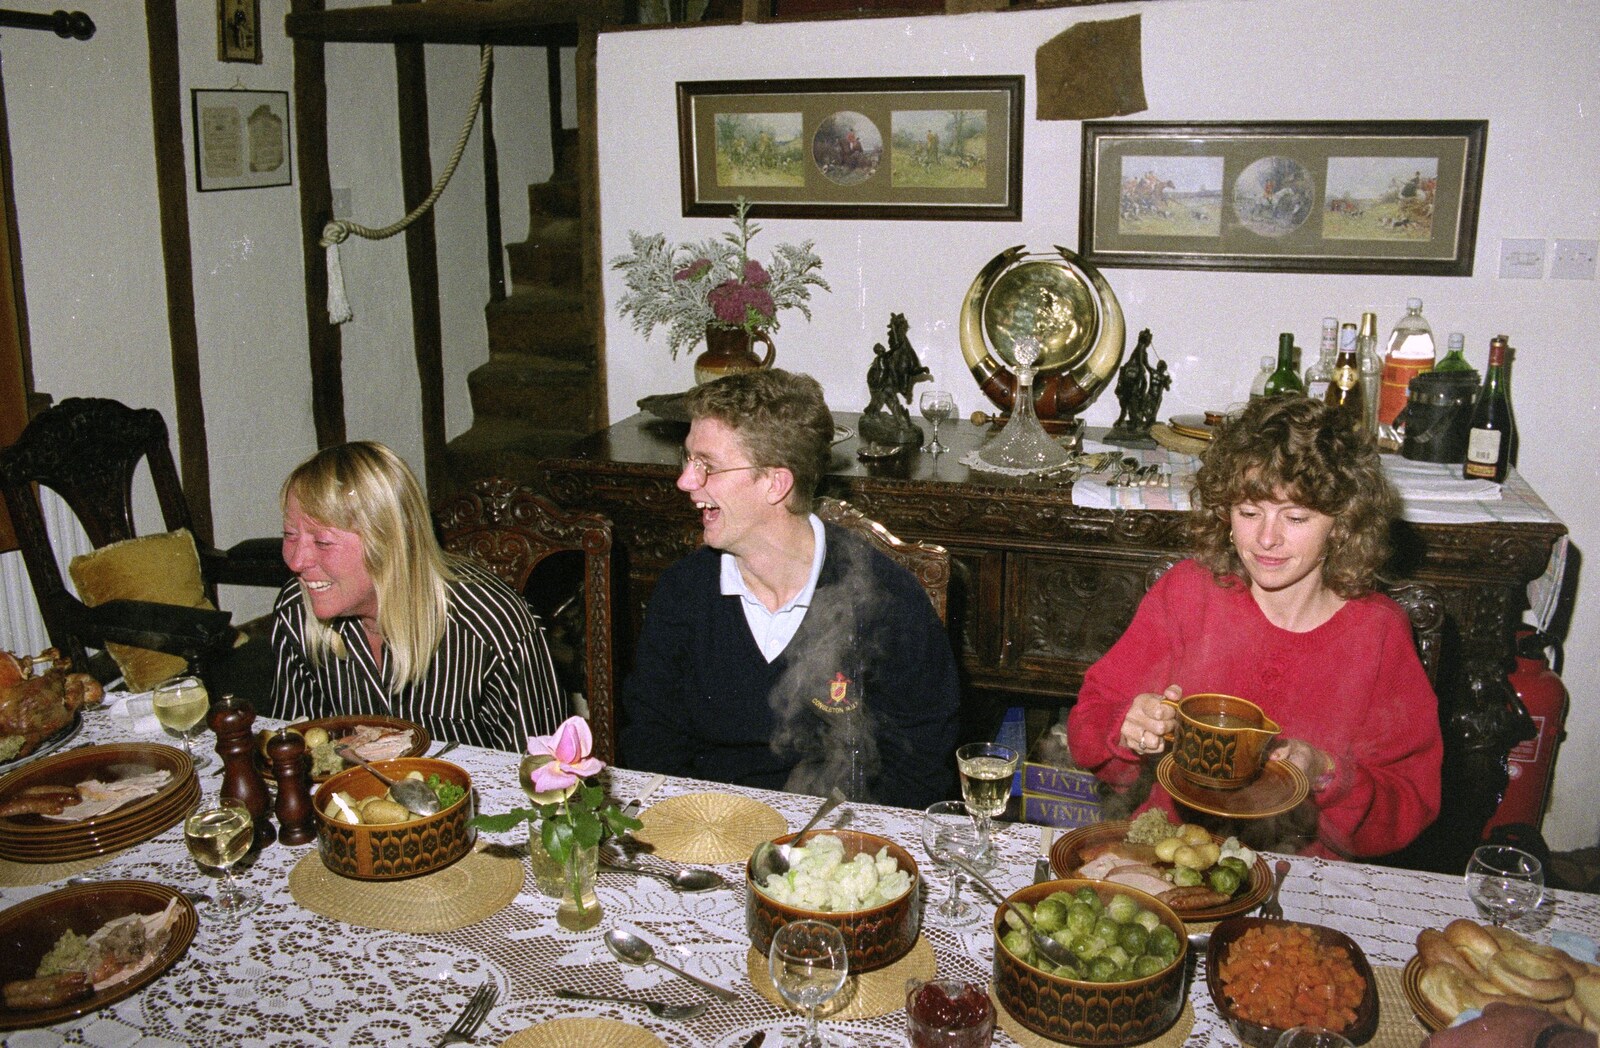 Sue, Andy and Mel from Cider Making, Stuston, Suffolk - 14th October 1991